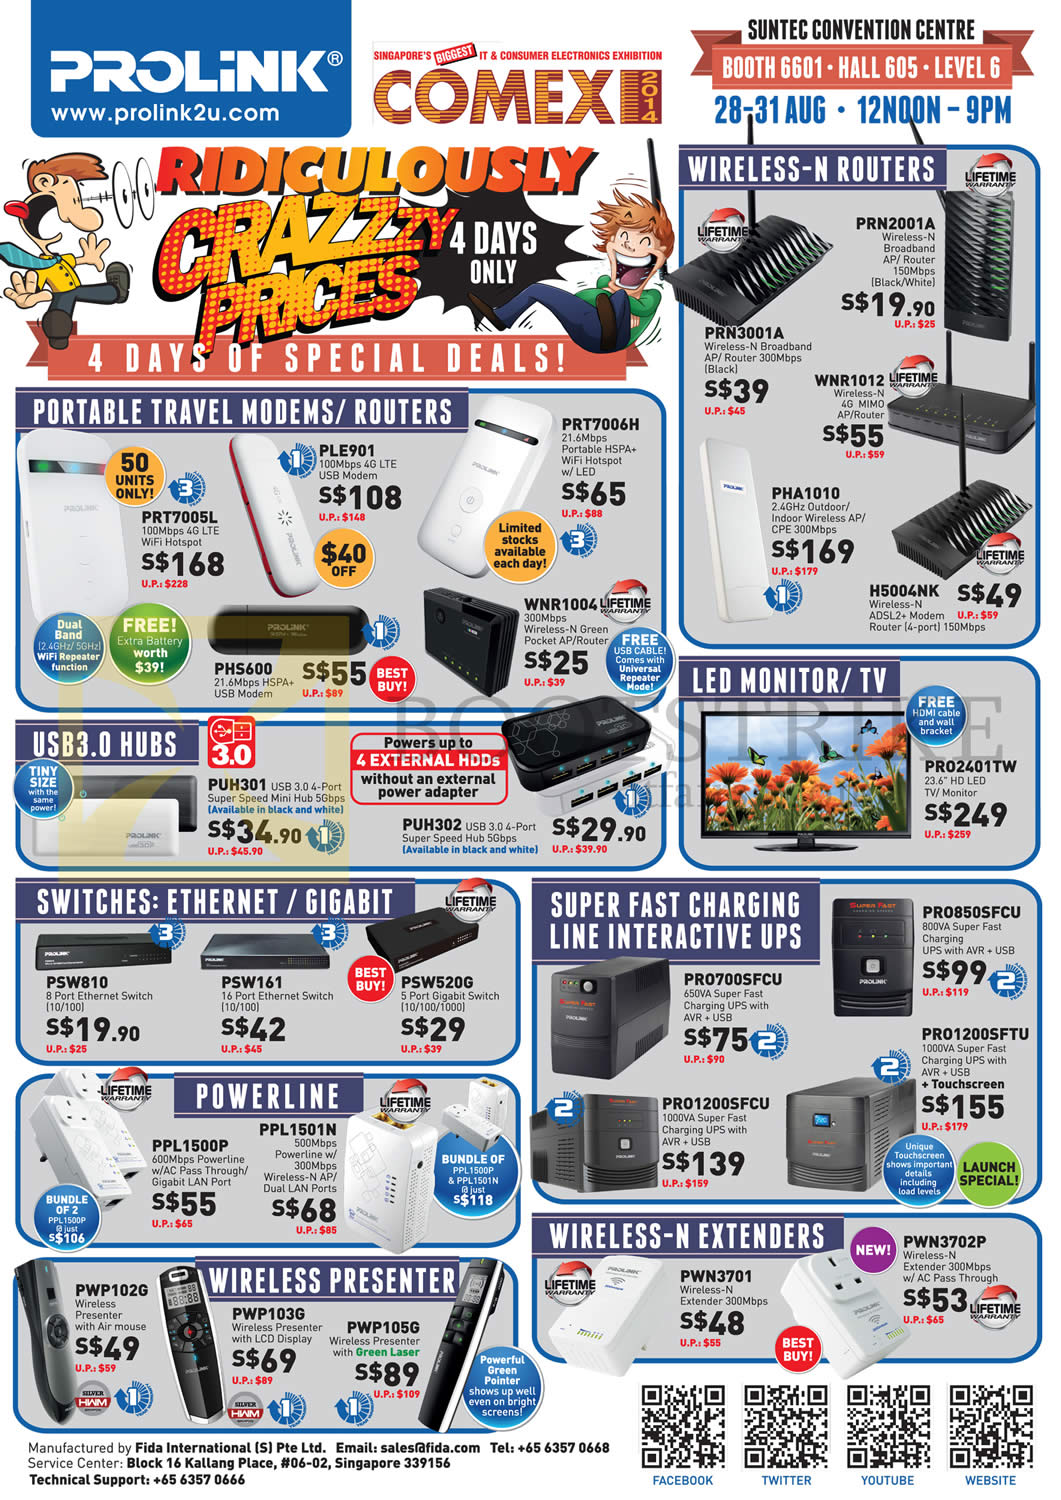 COMEX 2014 price list image brochure of Prolink Portable Modems, Wireless Routers, LED Monitor, TV, USB 3.0 Hubs, Switches, Powerline, Wireless Presenter